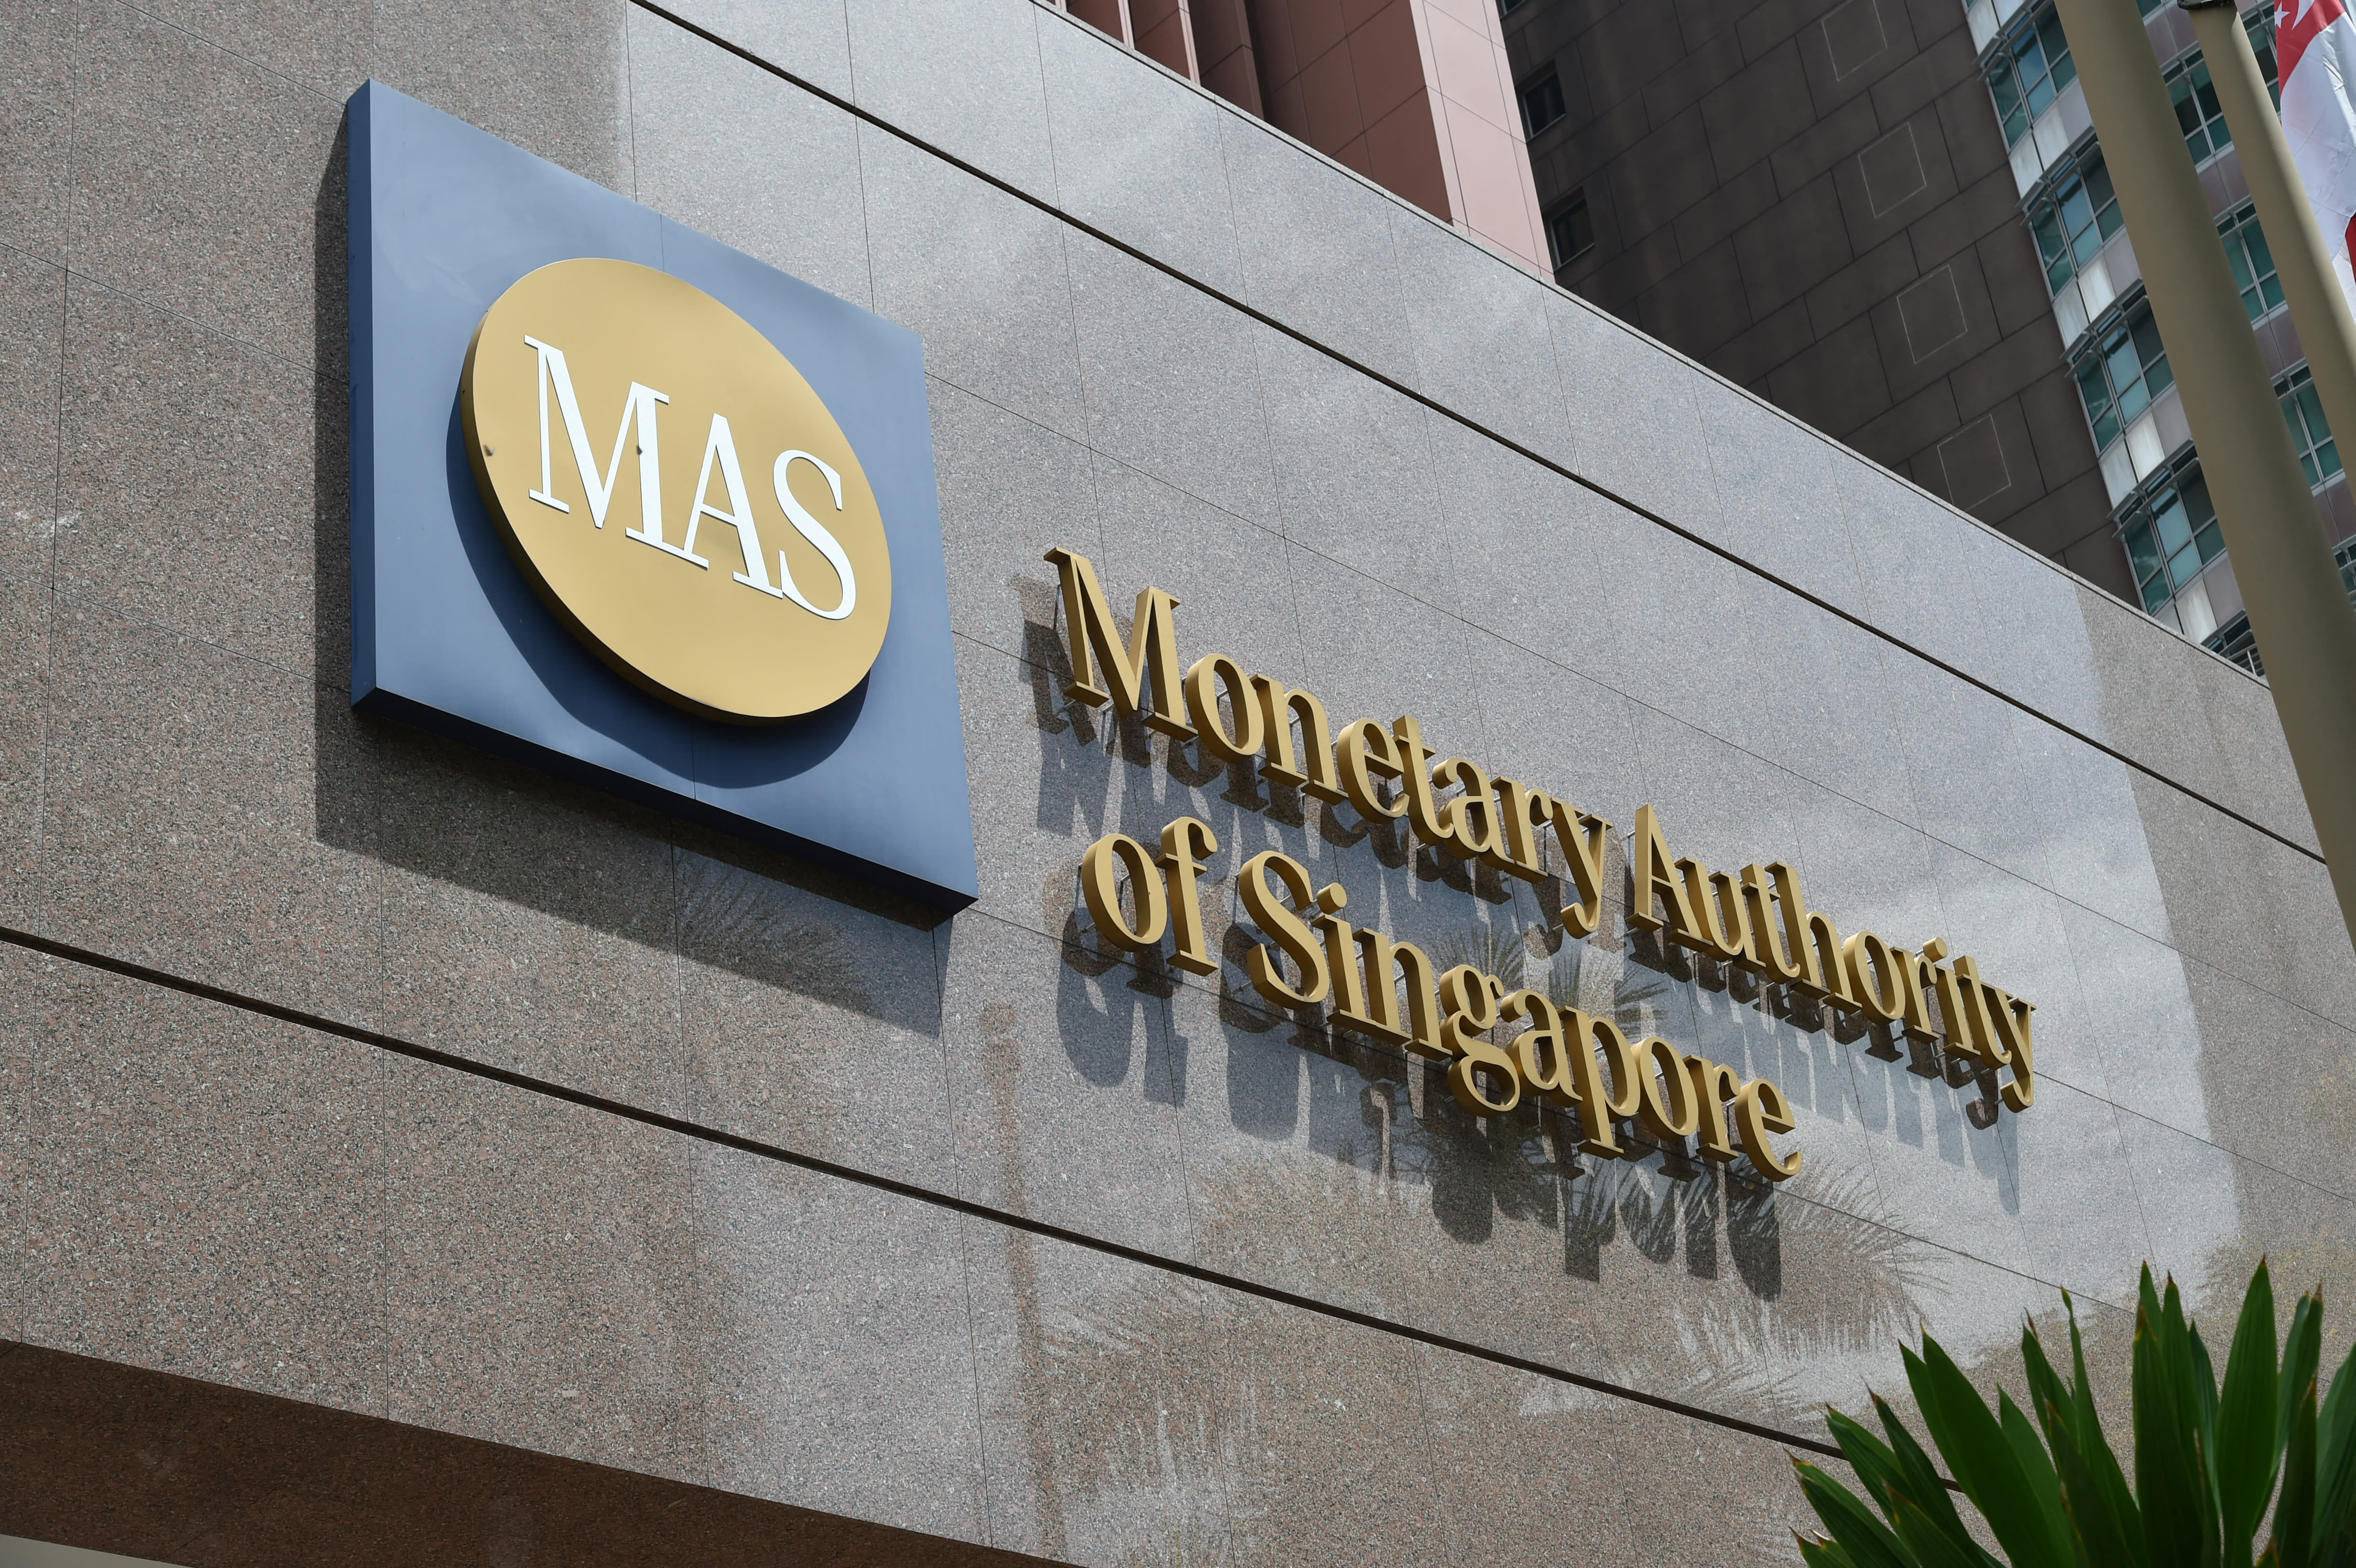 MAS said it expects overall inflation to come in at between 2.5 and 3.5 per cent in 2022, higher than the earlier forecast range of between 1.5 and 2.5 per cent. 